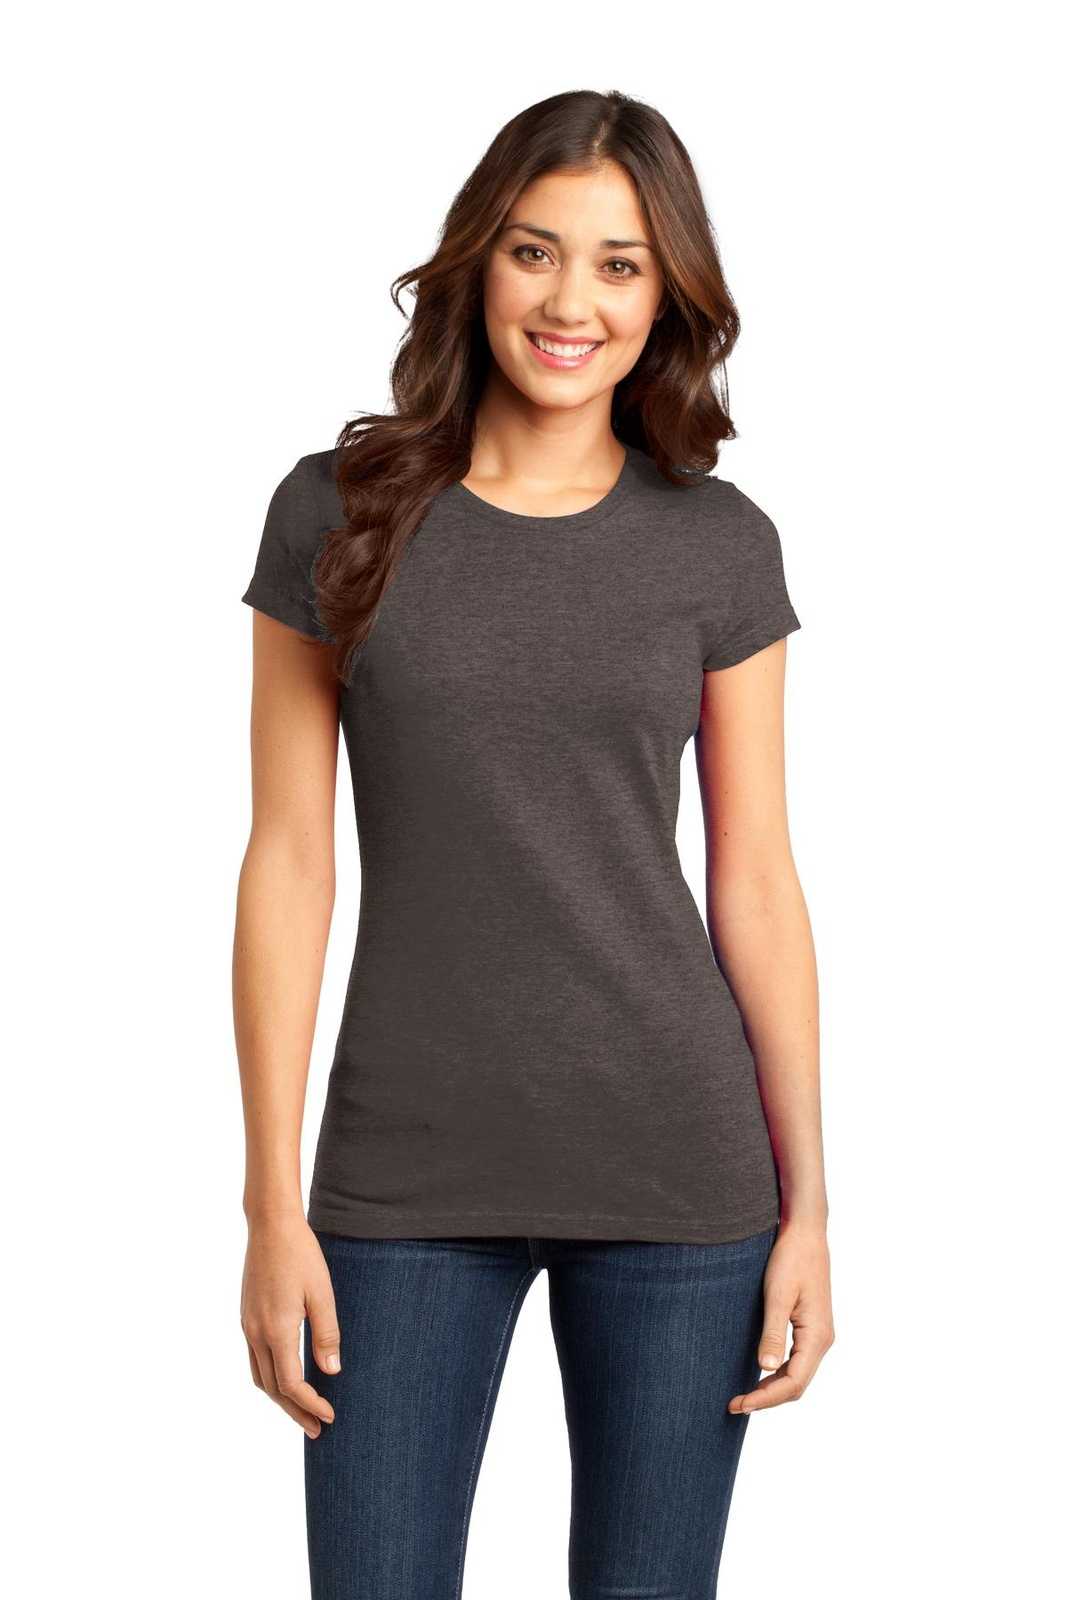 District DT6001 Women's Fitted Very Important Tee - Heathered Brown - HIT a Double - 1